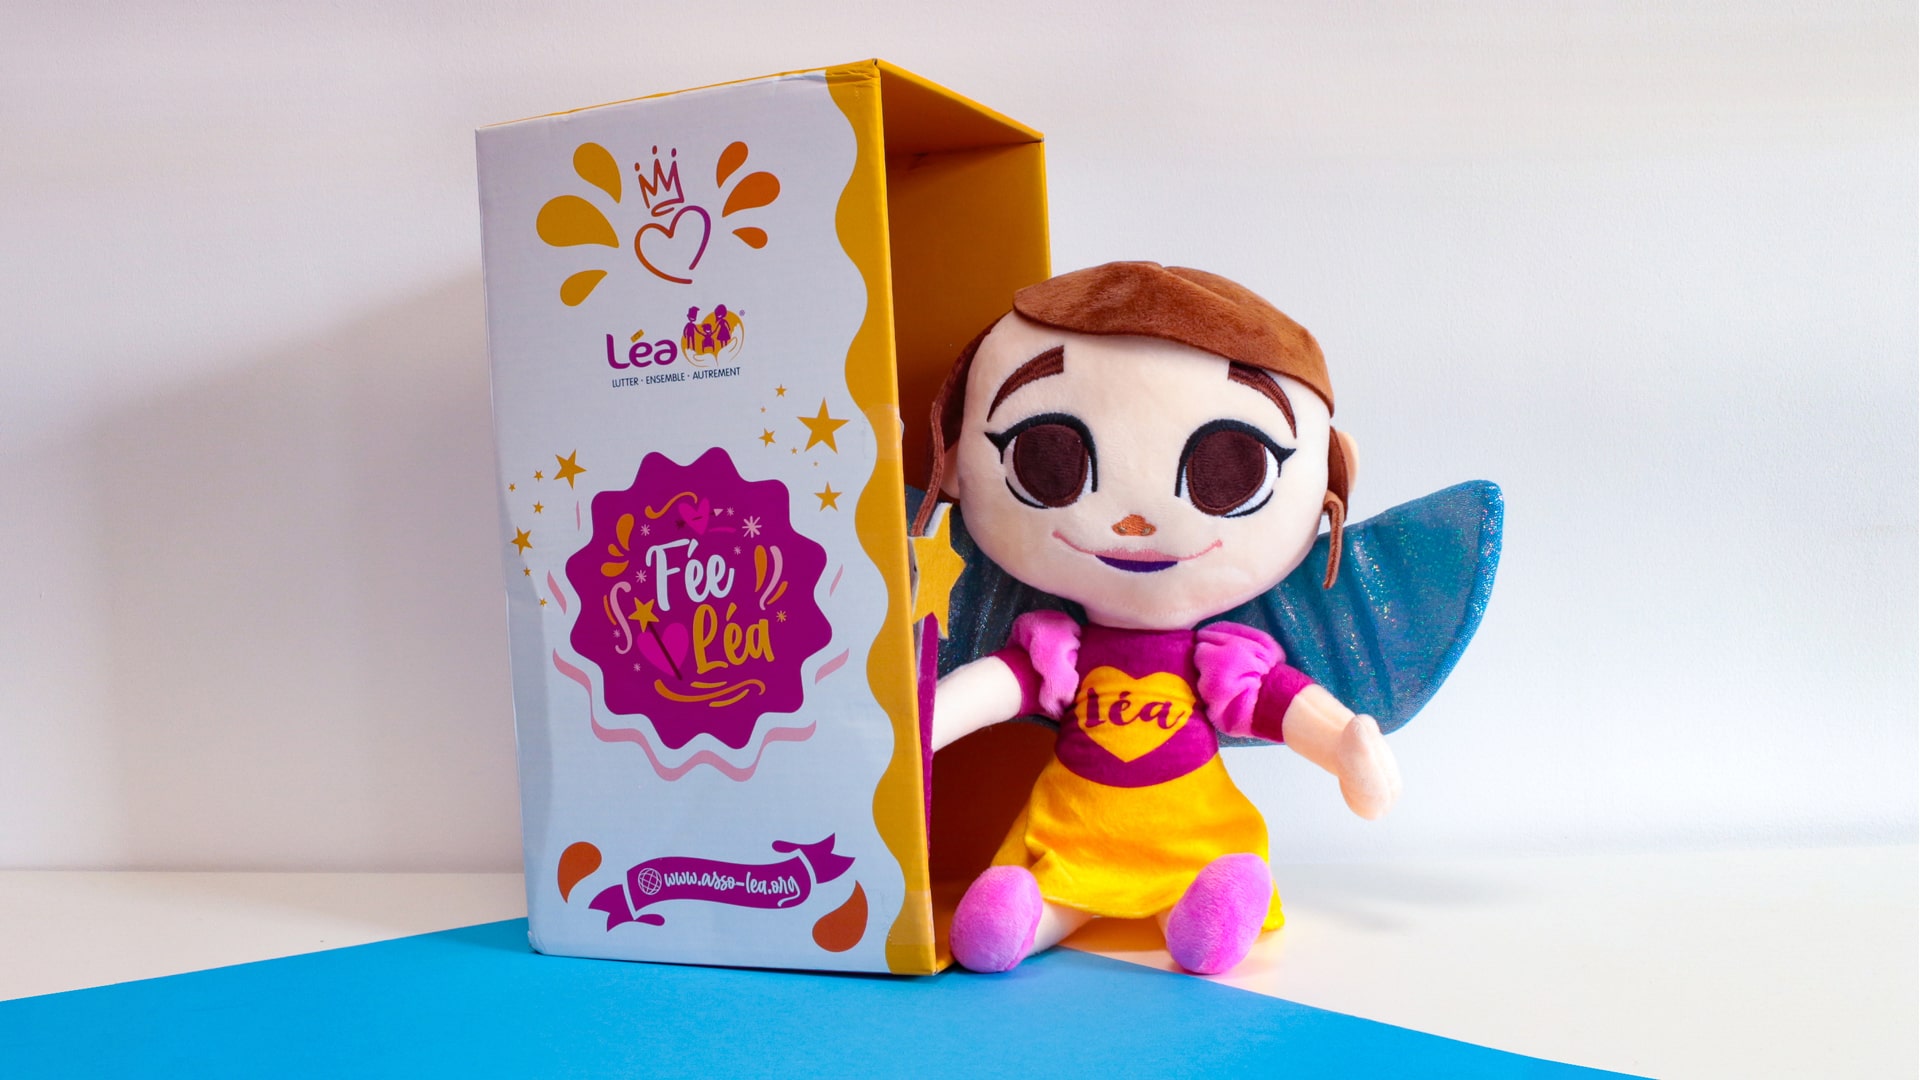 Custom-made Lea soft toy from the front